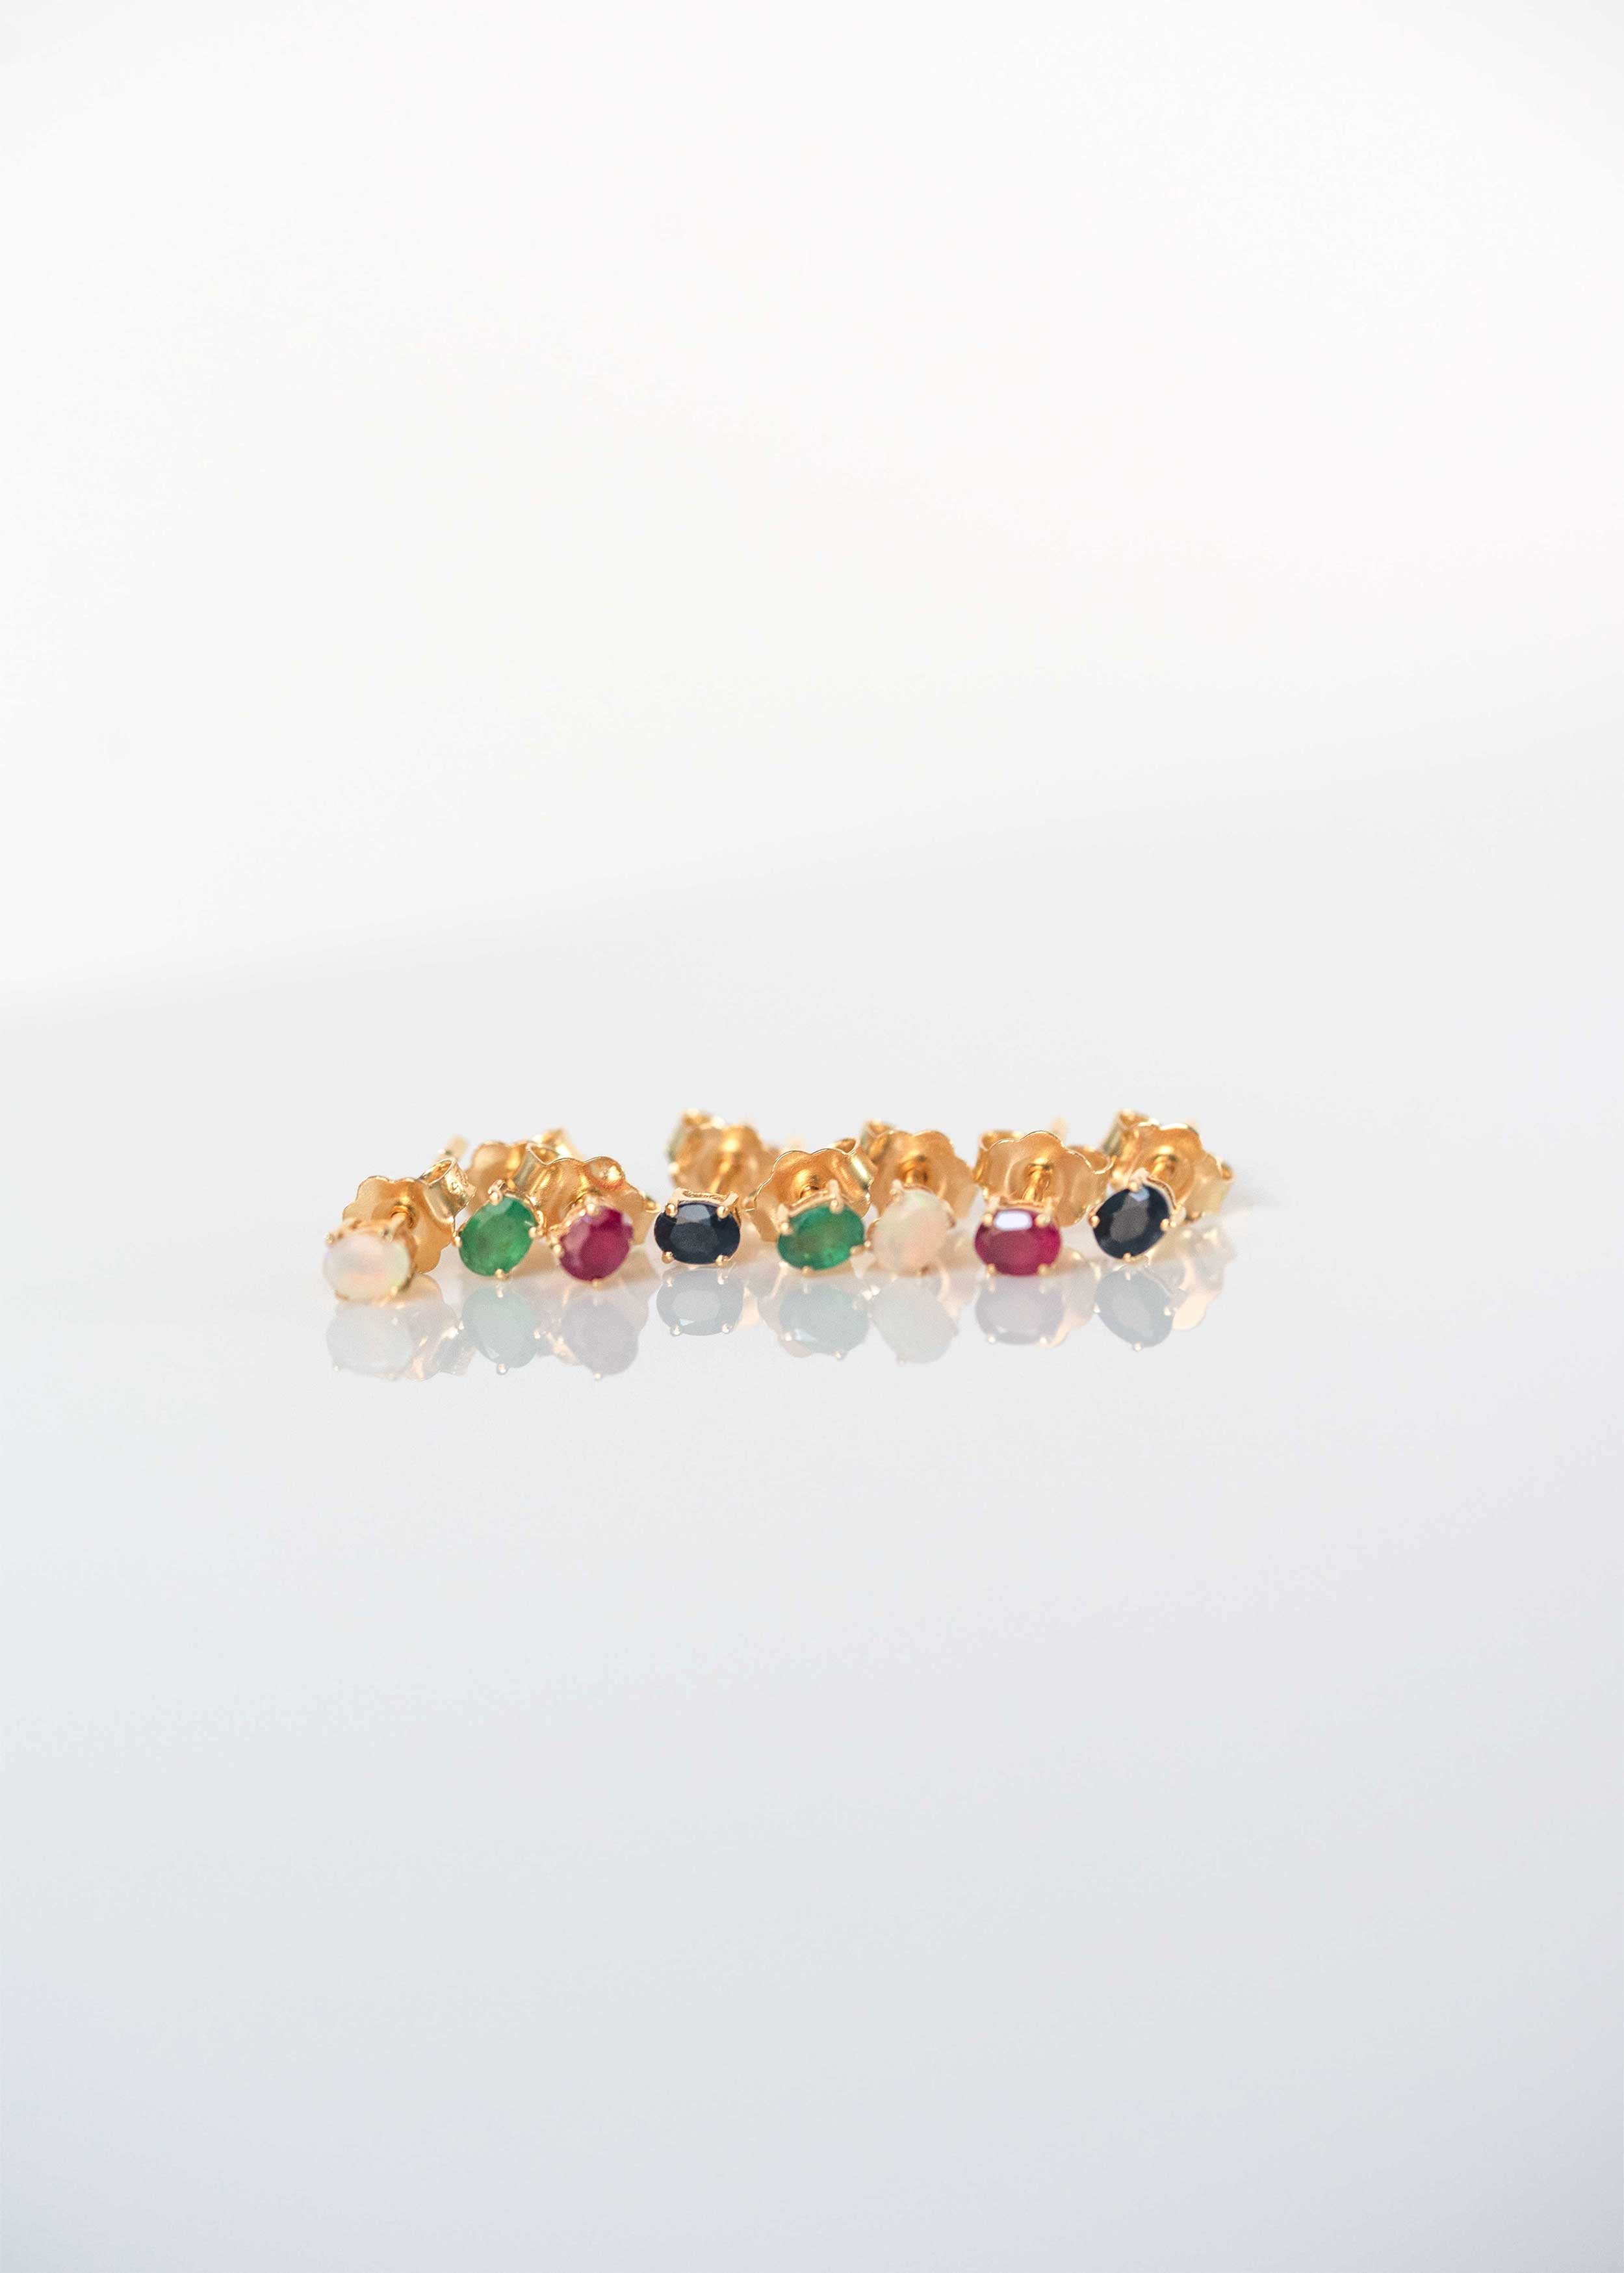 Gemstone earrings, cartilage dainty tiny studs for girls, best gift for teens girl ruby sapphire emerald